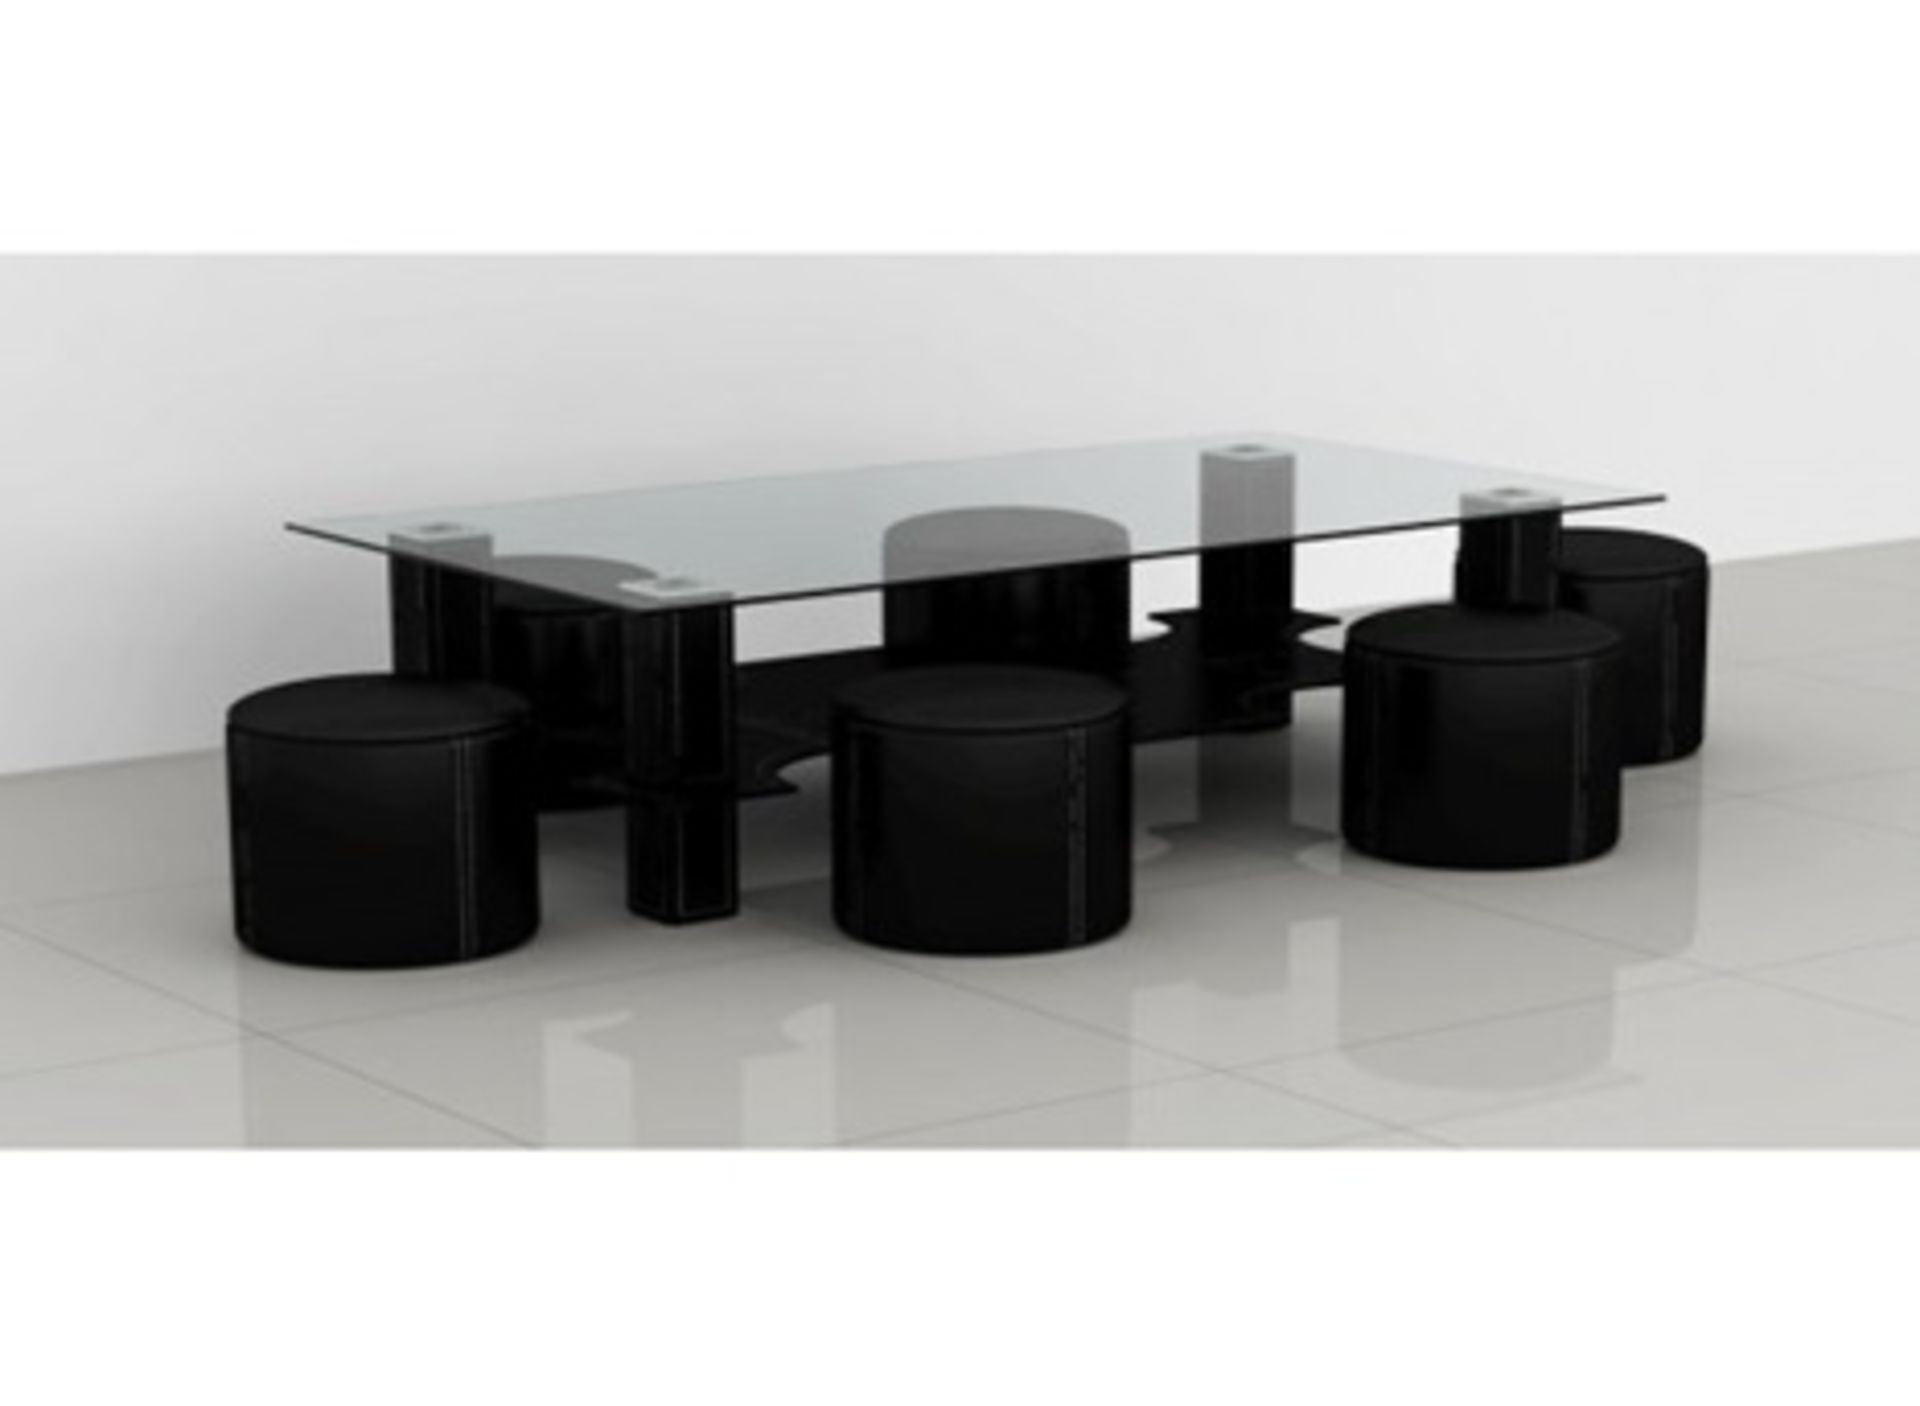 1 BRAND NEW BOXED RECTANGULAR CLEAR GLASS COFFEE TABLE WITH BLACK BASE AND 6 BLACK STORAGE STOOLS